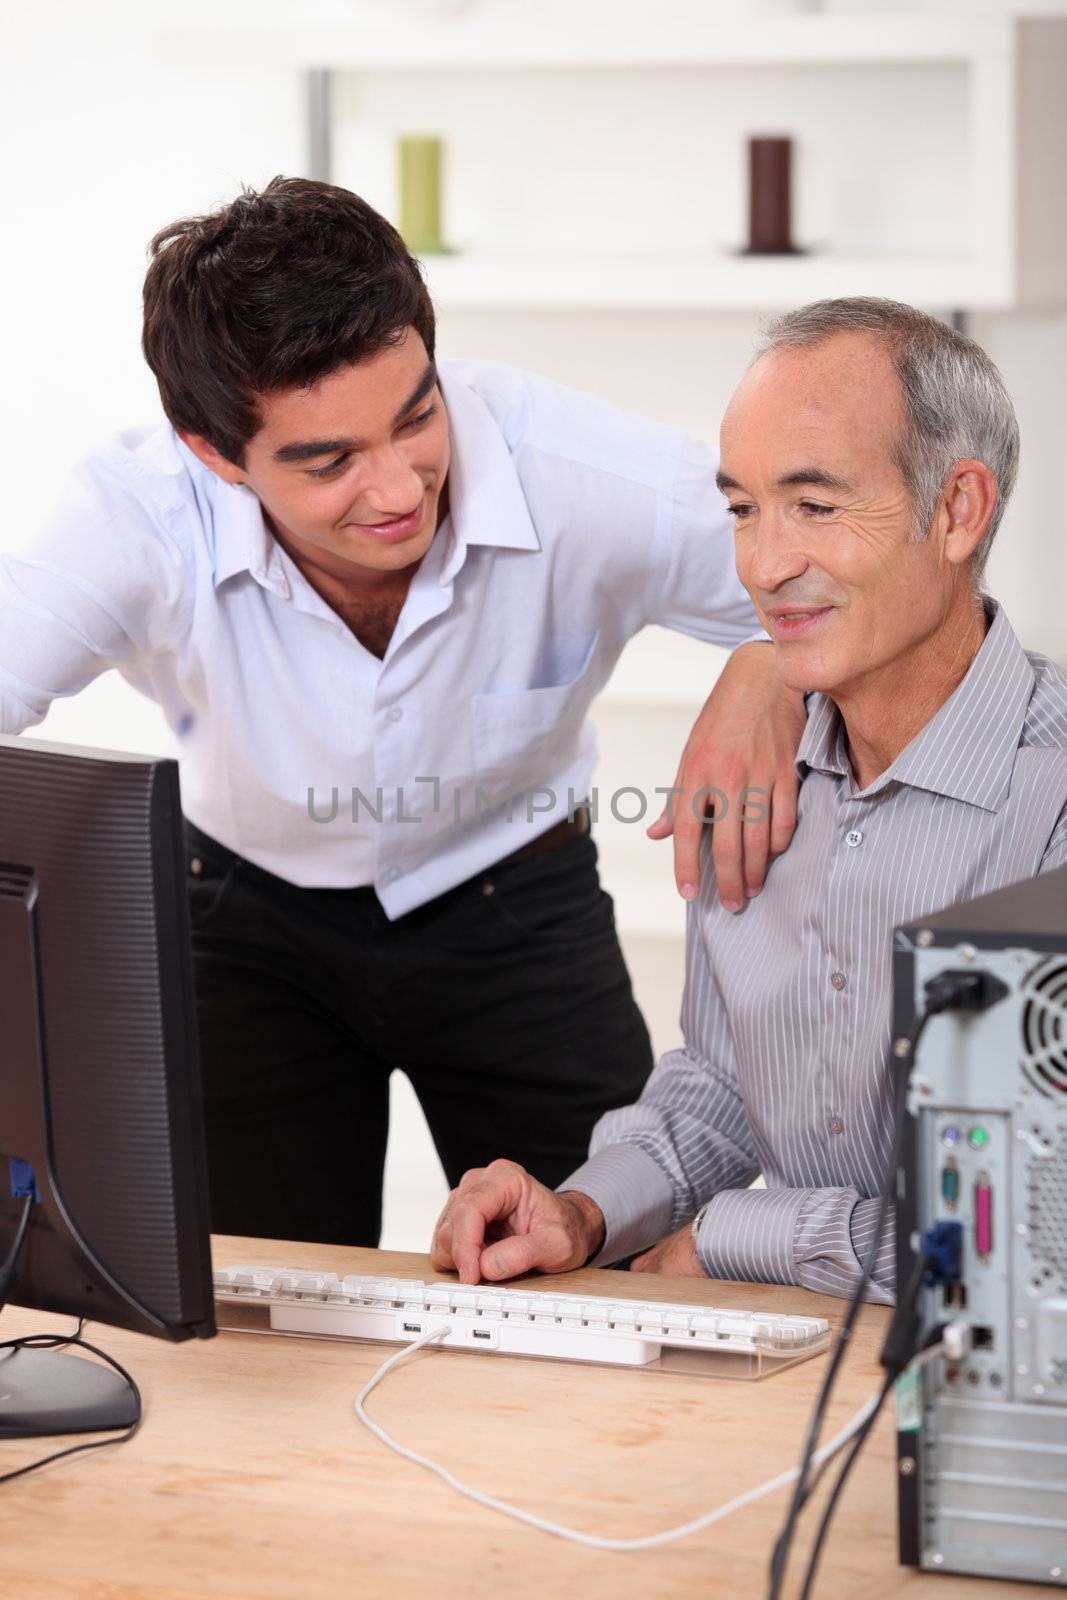 Son helping father with computer